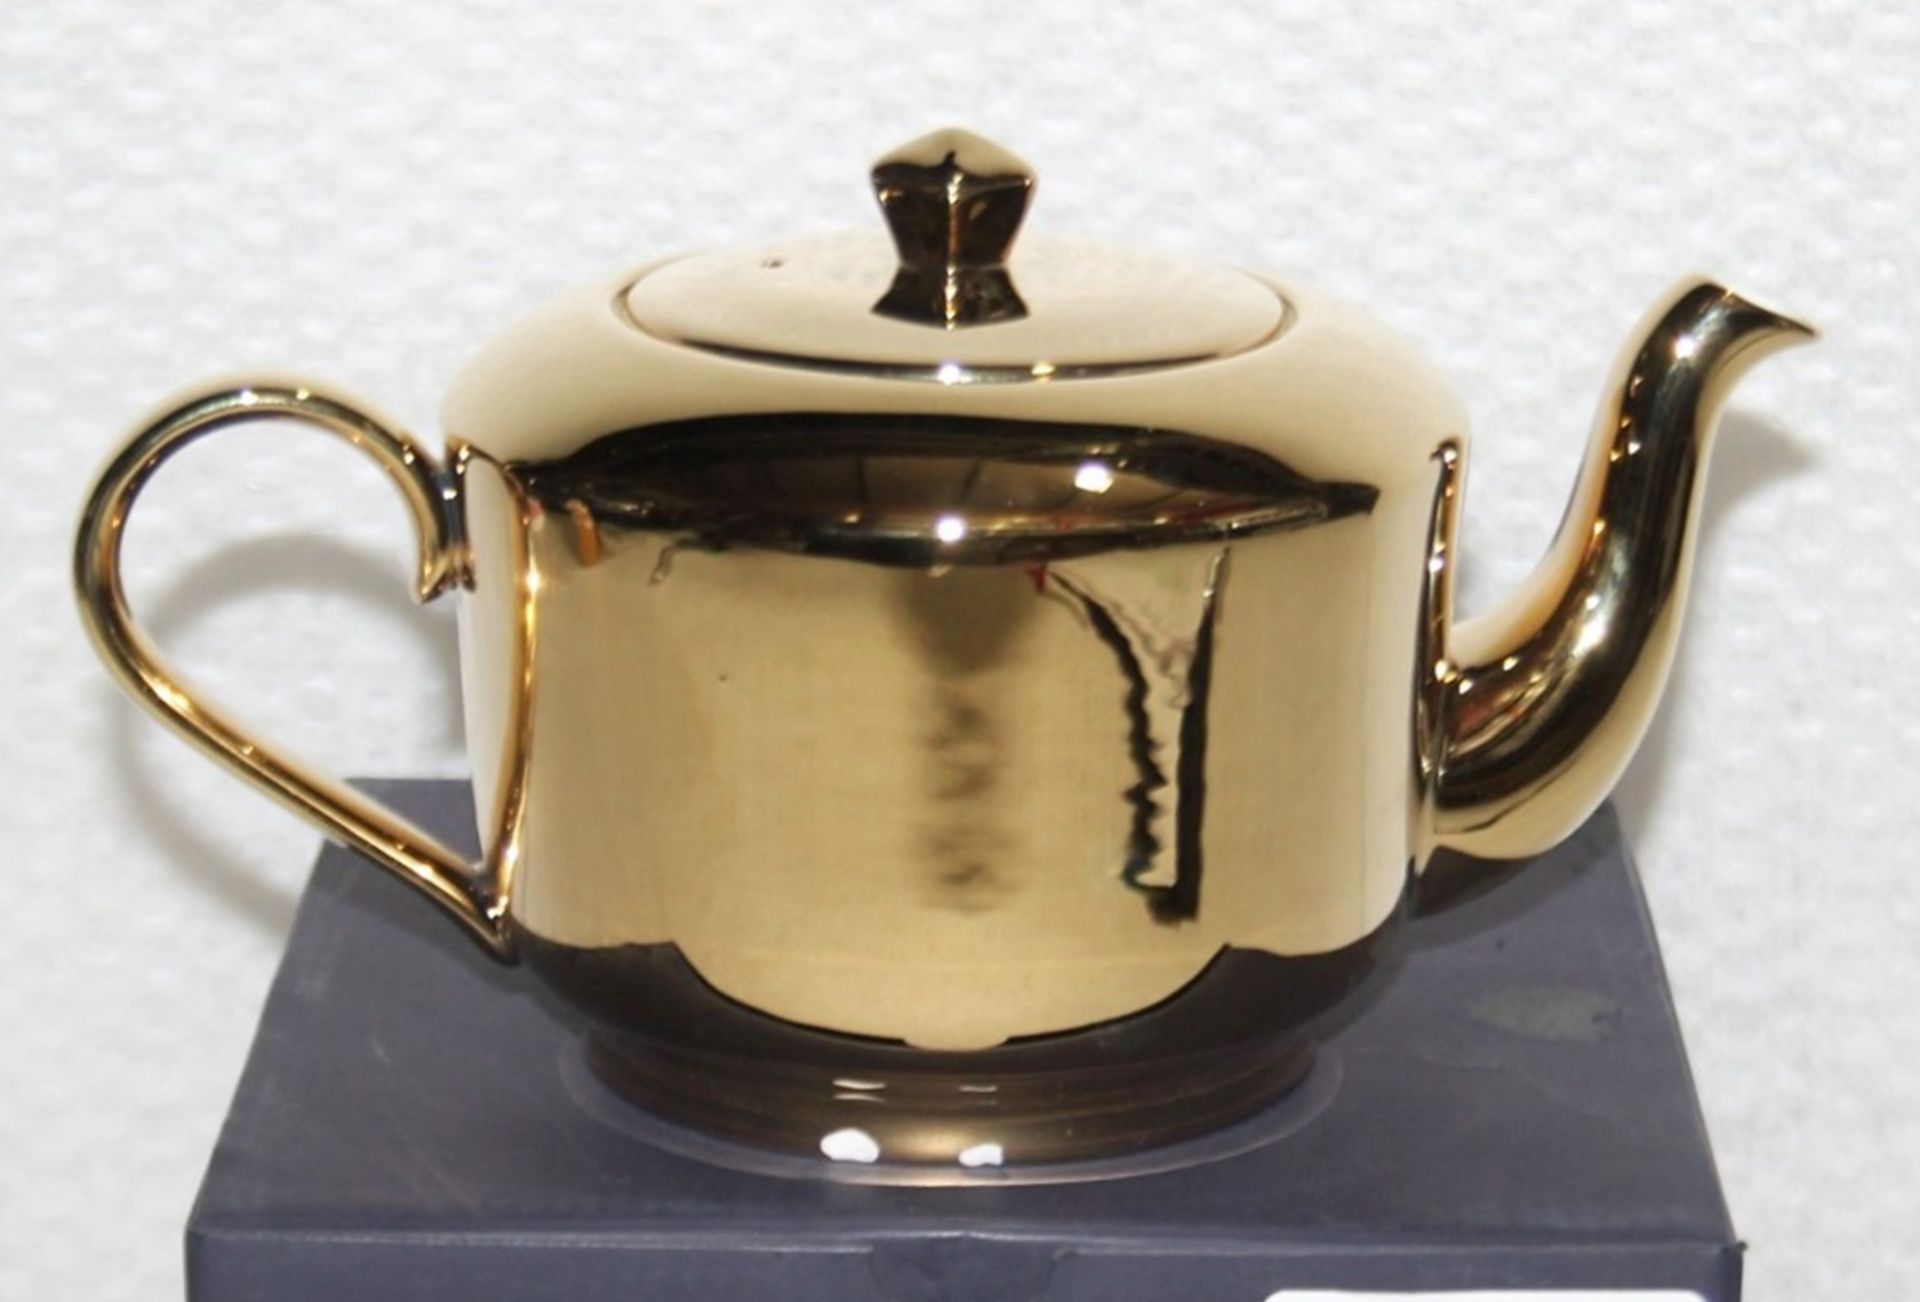 1 x RICHARD BRENDON 'Reflect' Fine Bone China Teapot In Gold - Original Price £250.00 *See Condition - Image 4 of 9